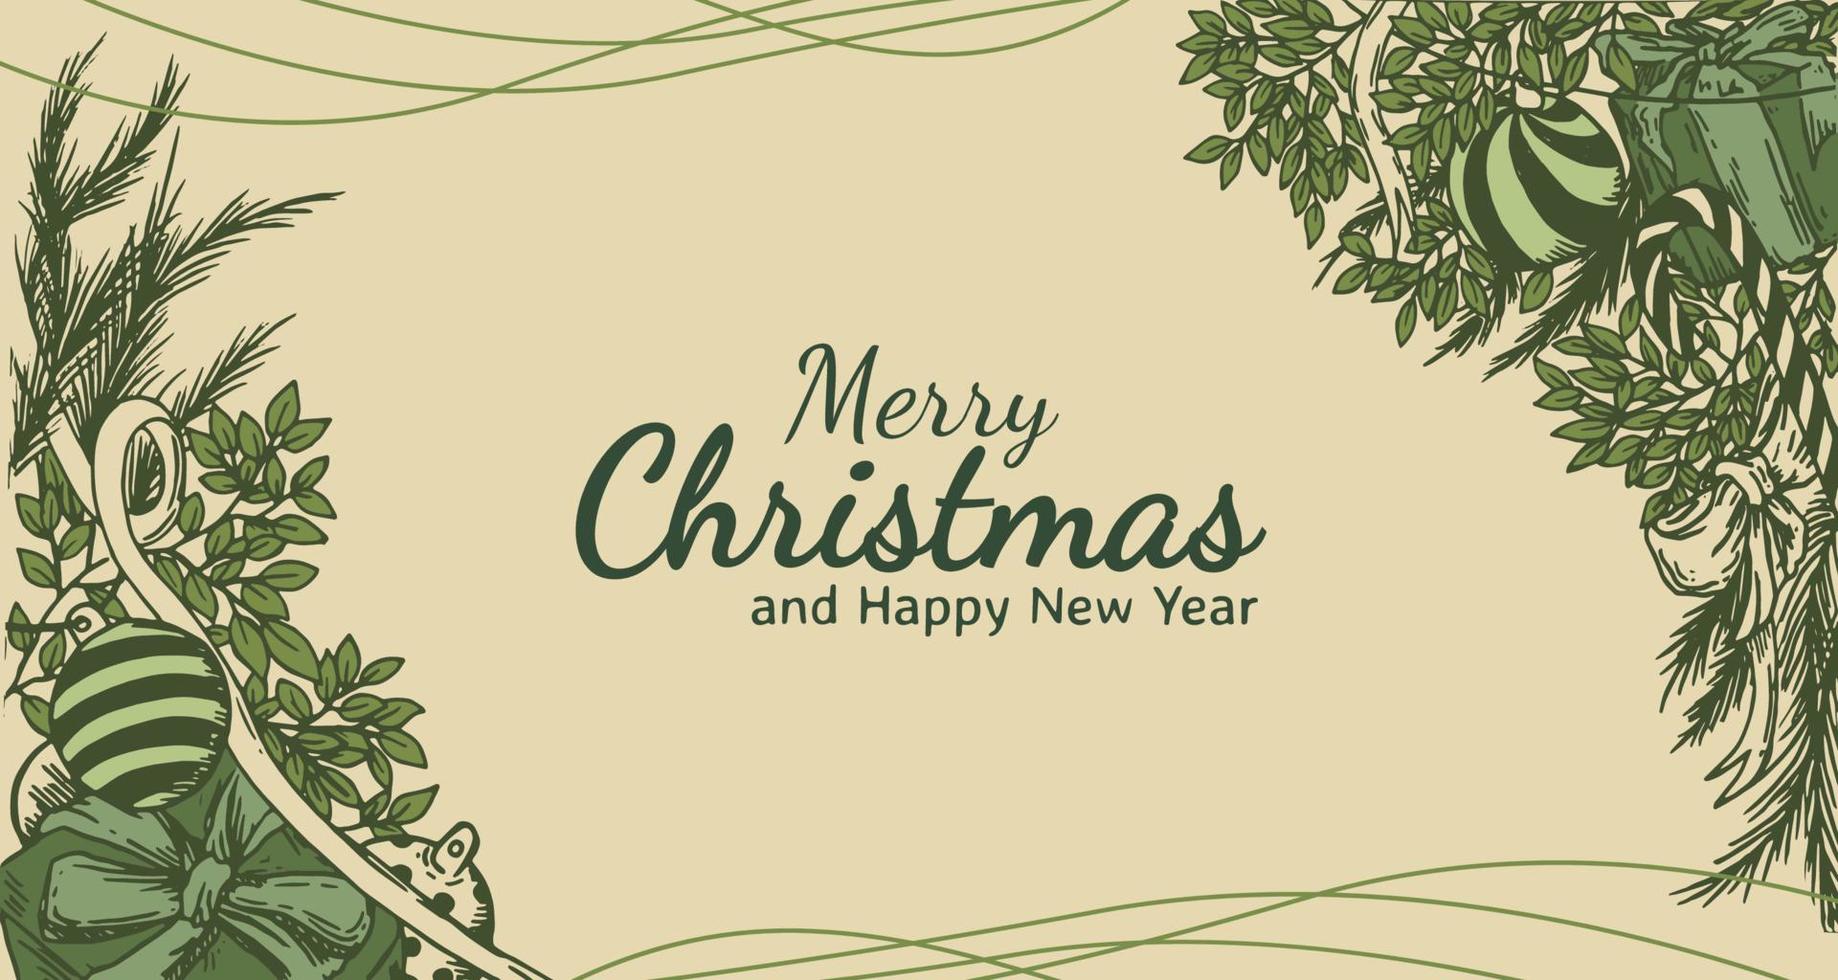 Hand drawn merry christmas and happy new year background with cream and green tones vector